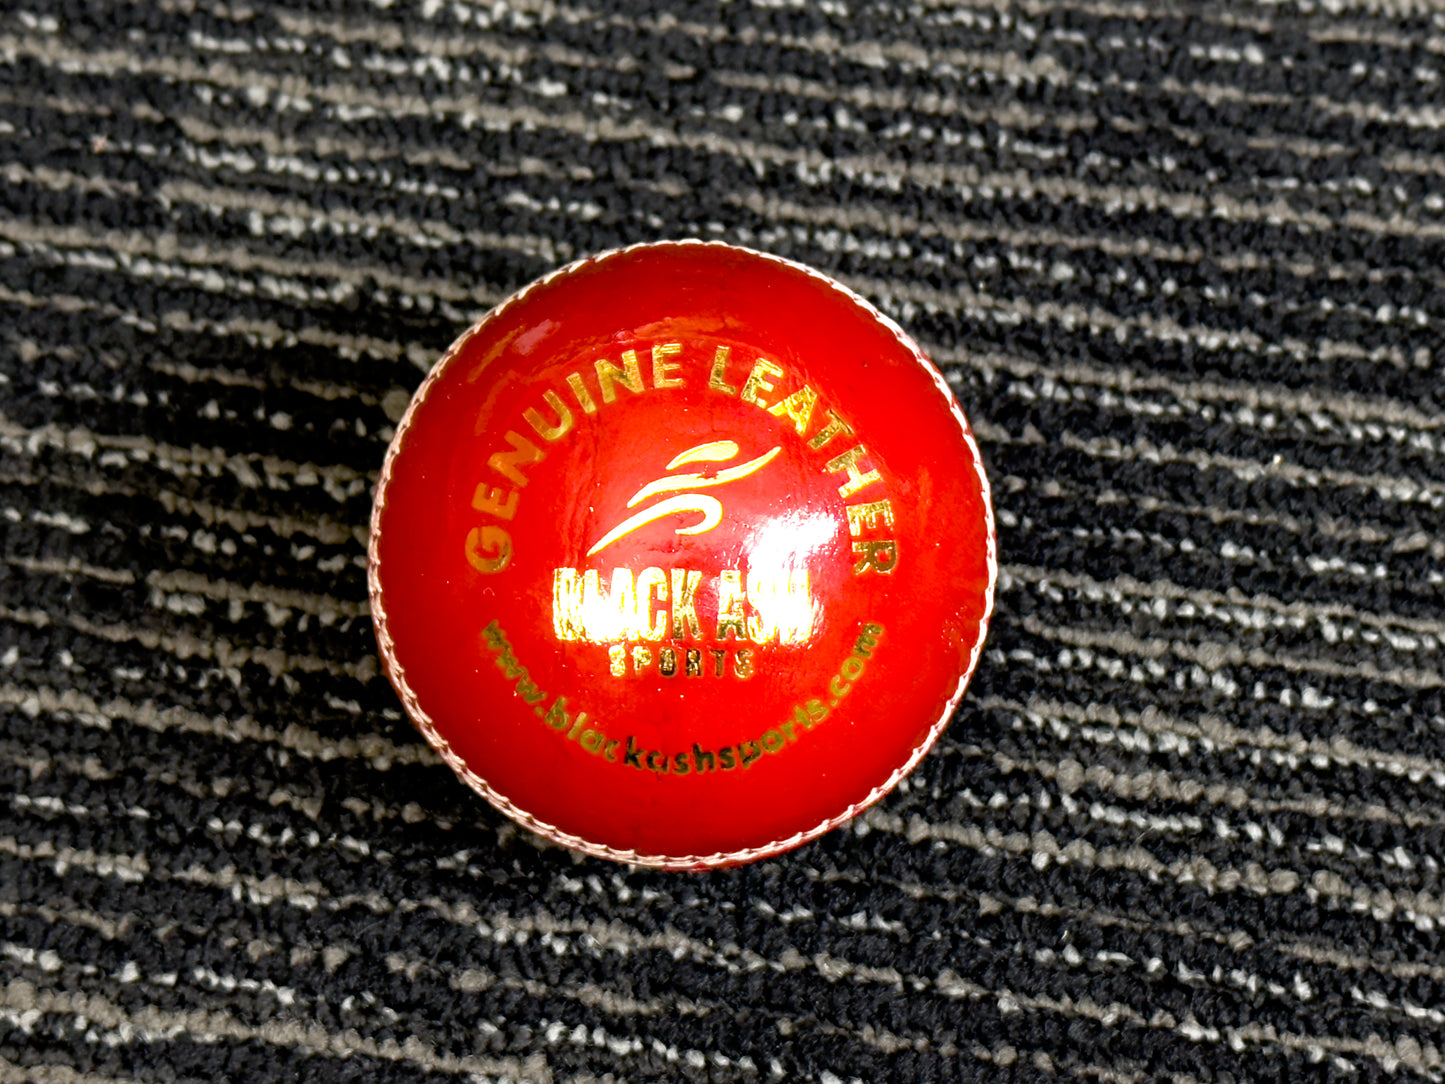 Pack of 6 red cricket balls, labeled 'Black Ash Seamer,' made from genuine leather with a 4-piece construction, offering excellent shape retention. These machine-stitched balls are suitable for practice T20 cricket, conform to MCC regulations, and each weighs 156 grams (5.5 ounces).